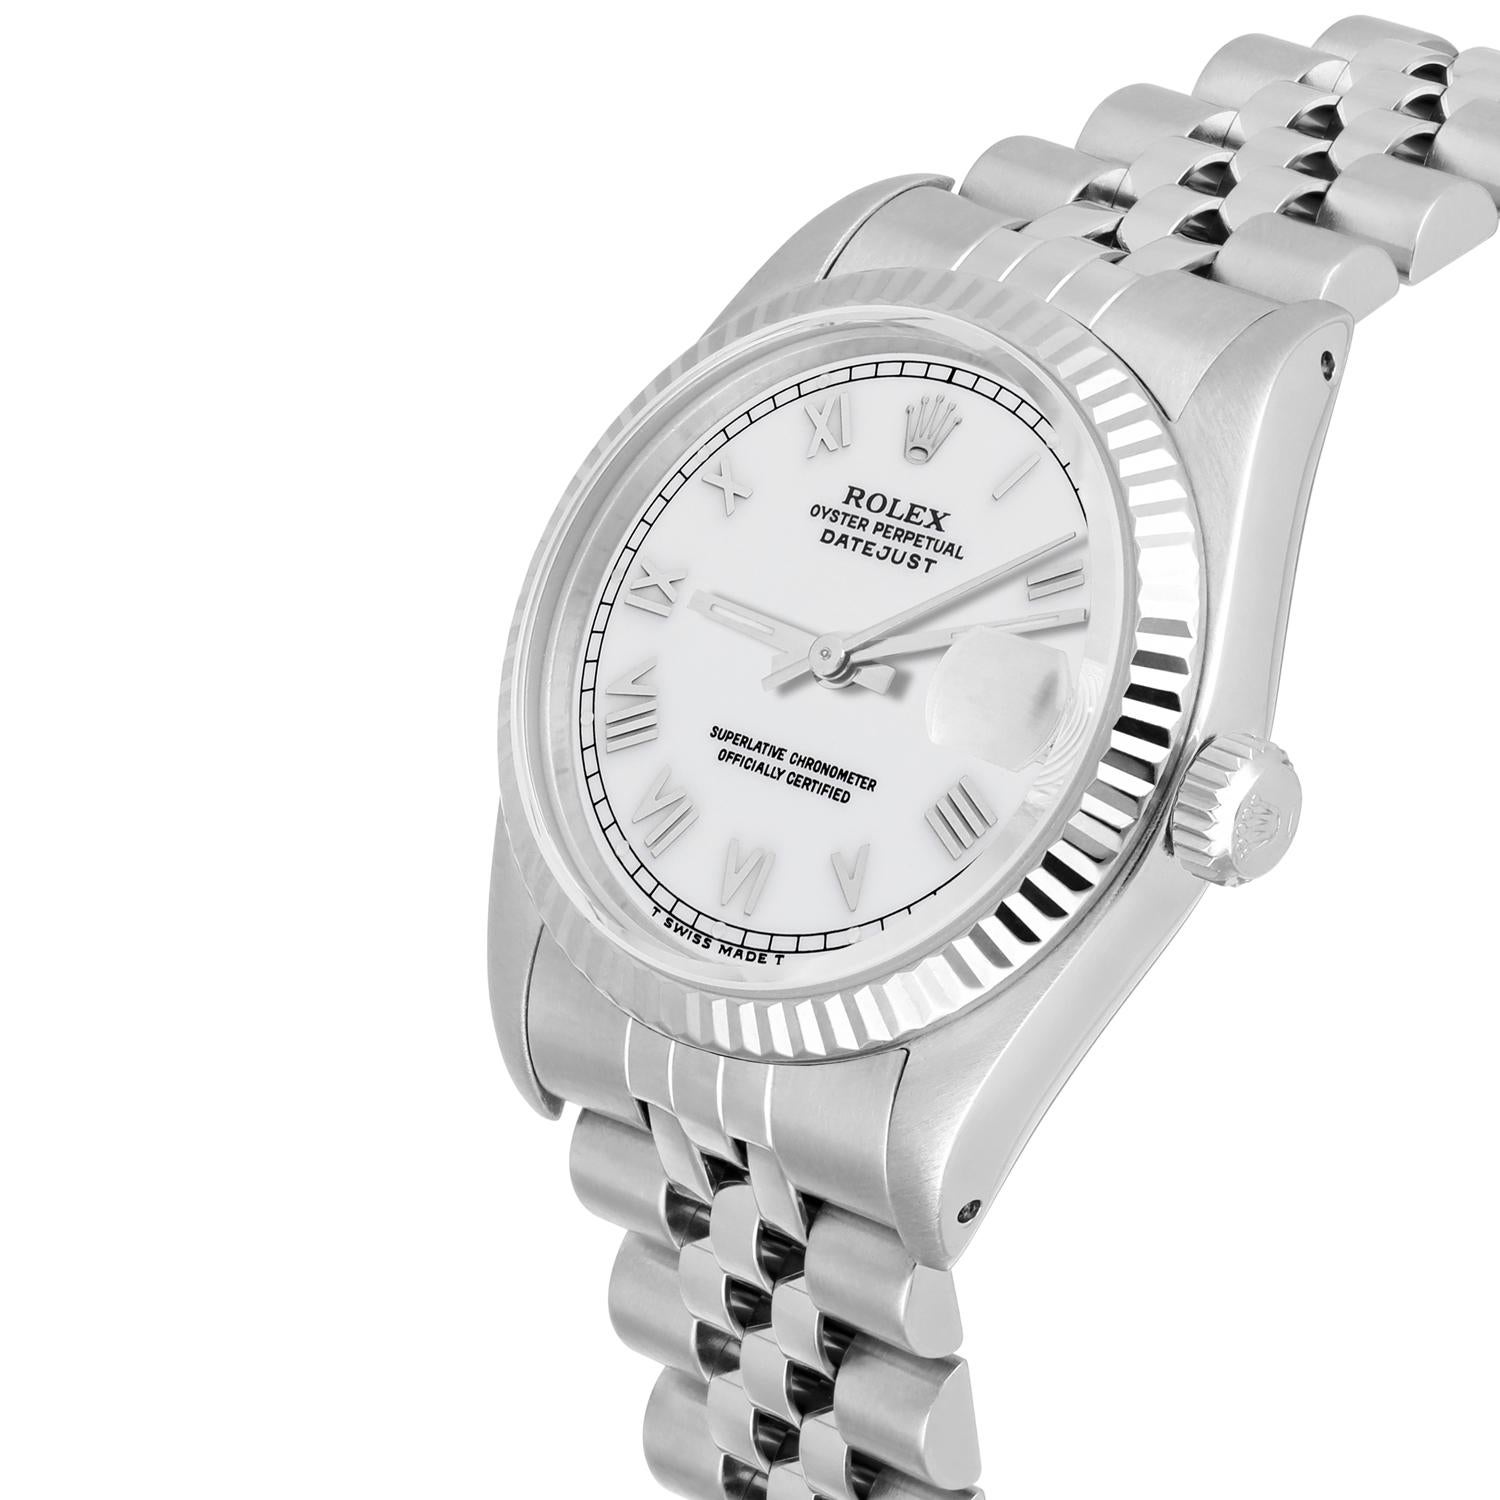 Rolex Datejust 31mm 68274 White Roman Dial Stainless Steel Watch W/G Bezel Circa In Excellent Condition For Sale In New York, NY